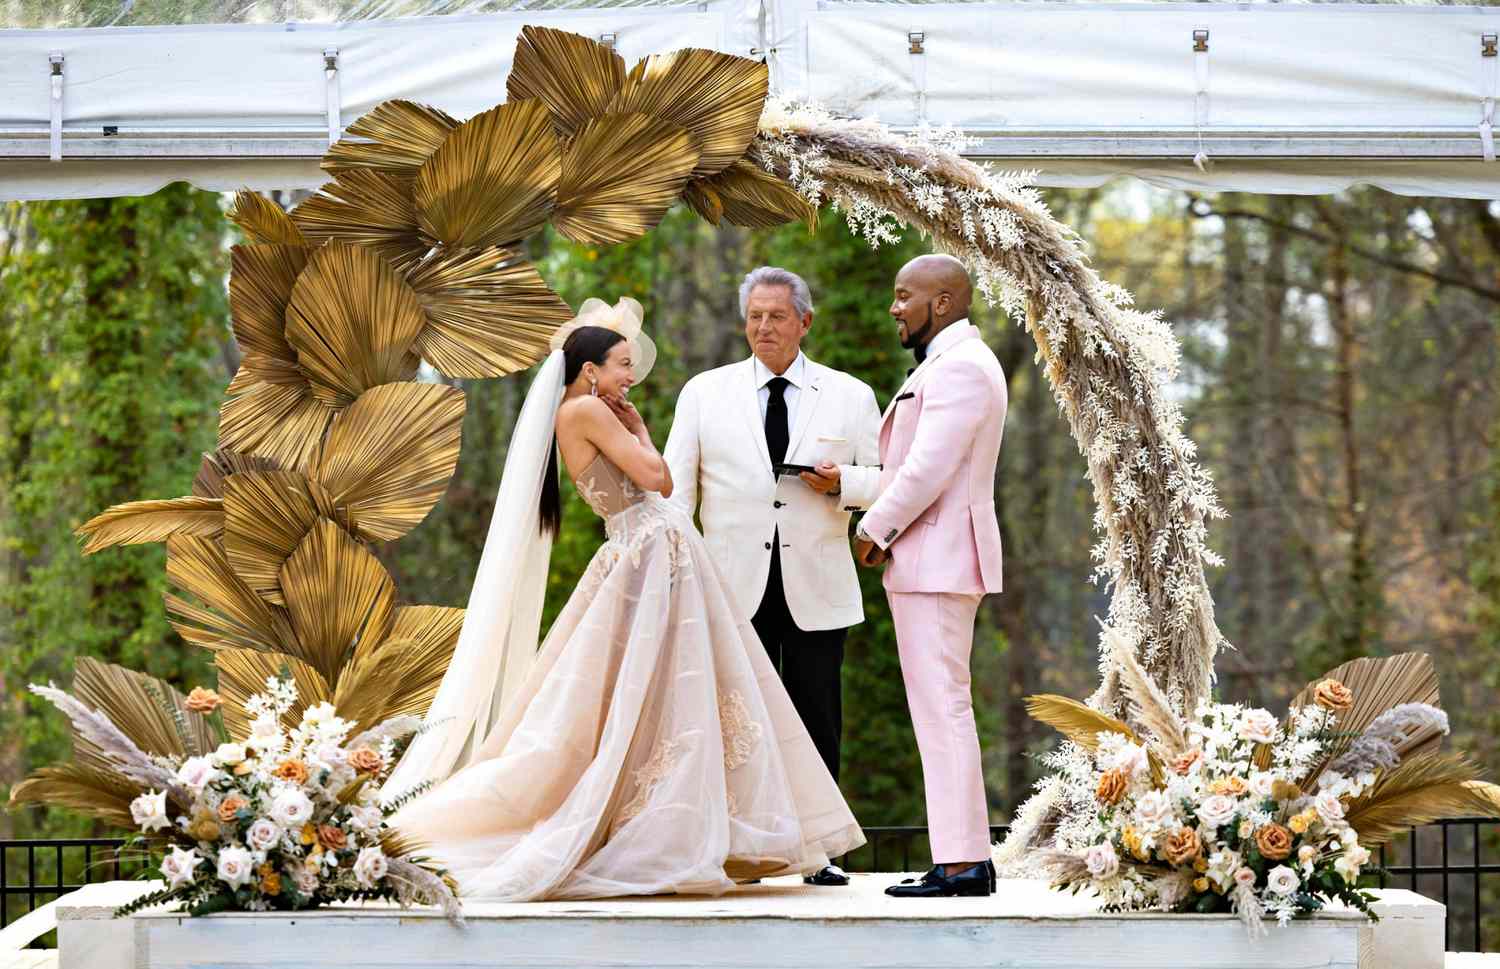 Jeannie Mai and Jeezy Marry in Intimate Wedding Ceremony at Their Atlanta Home